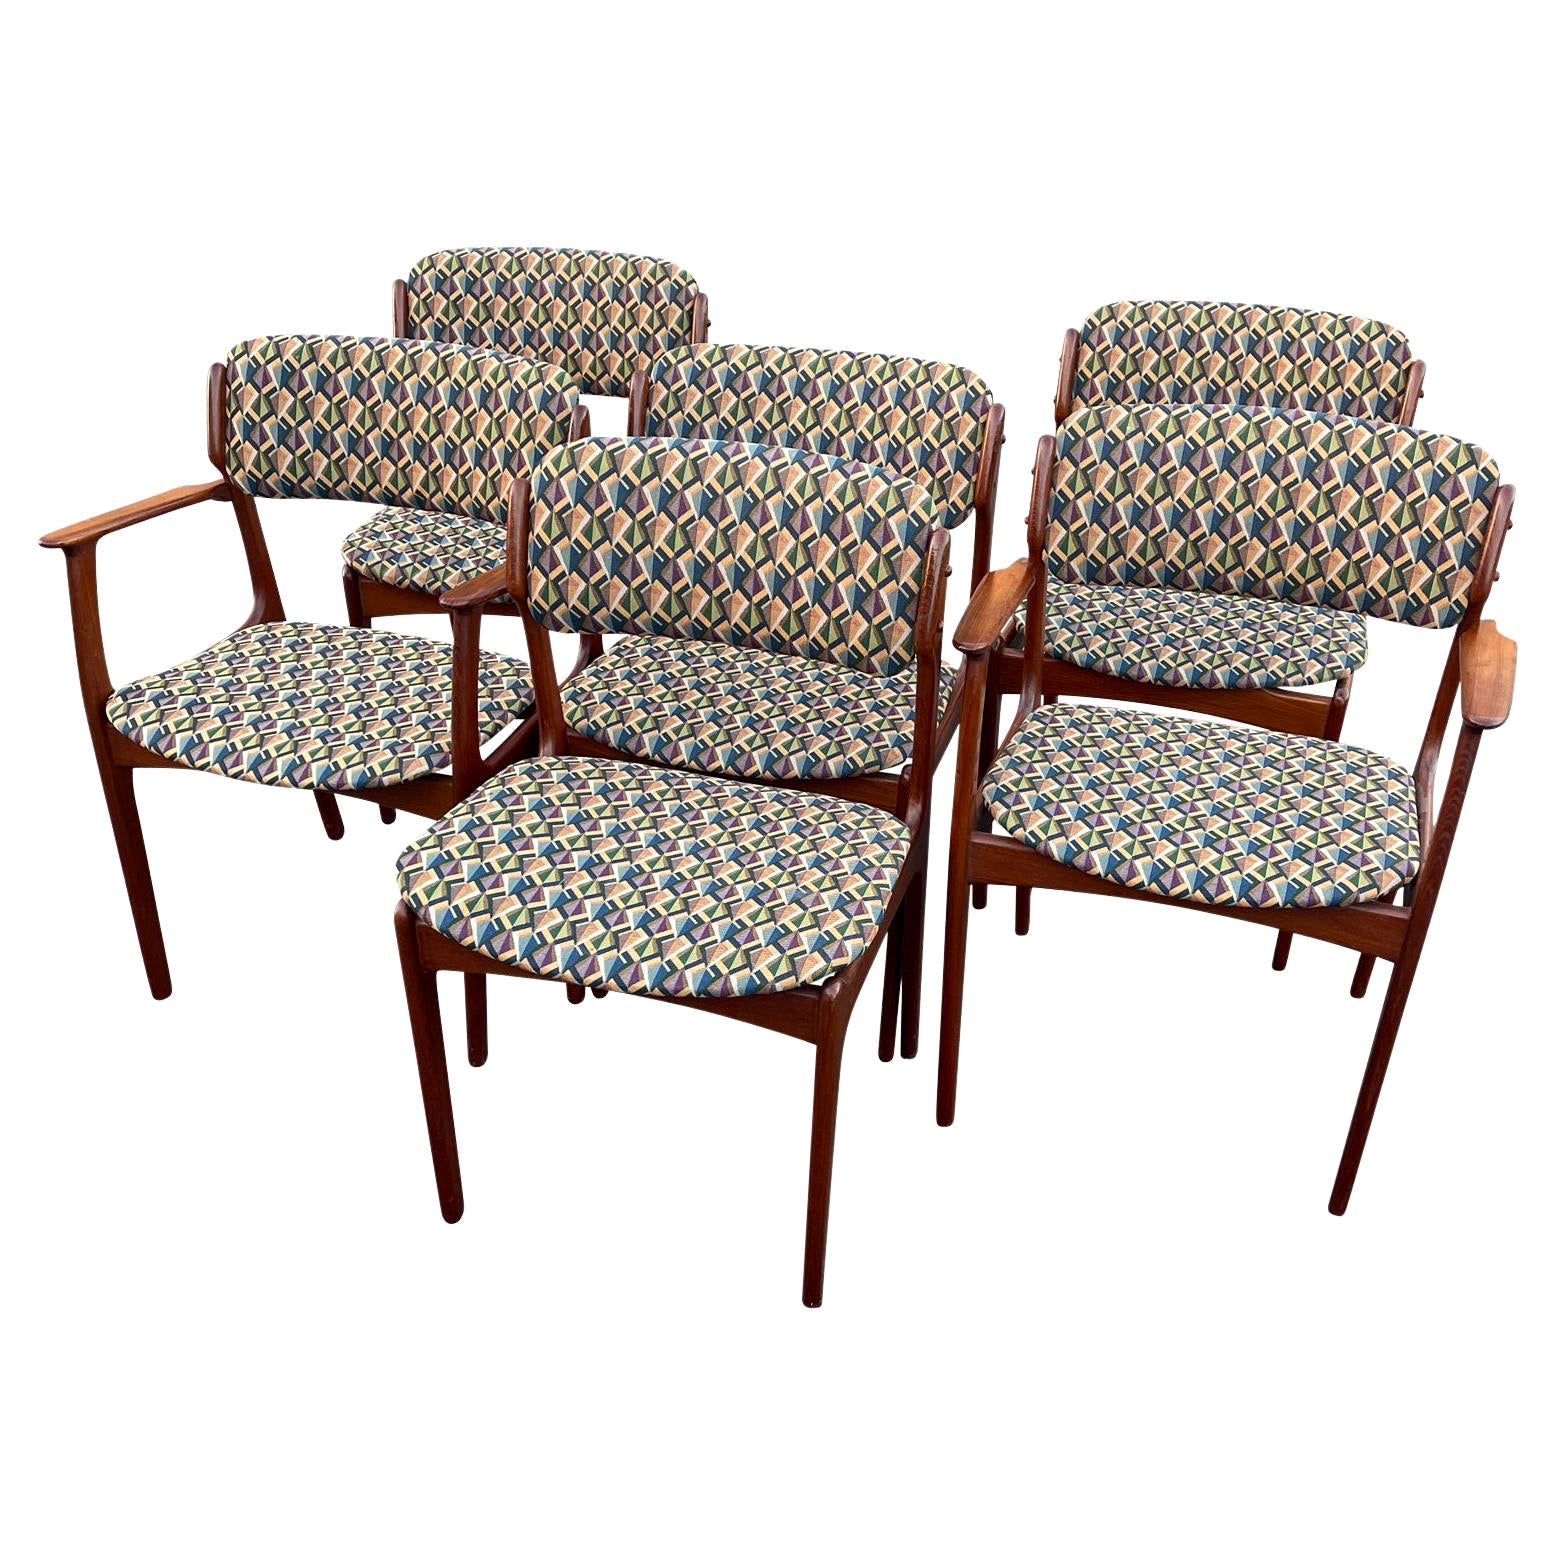 Set of 6 Danish Dining Chairs by Domus Odense, Denmark Scandinavia